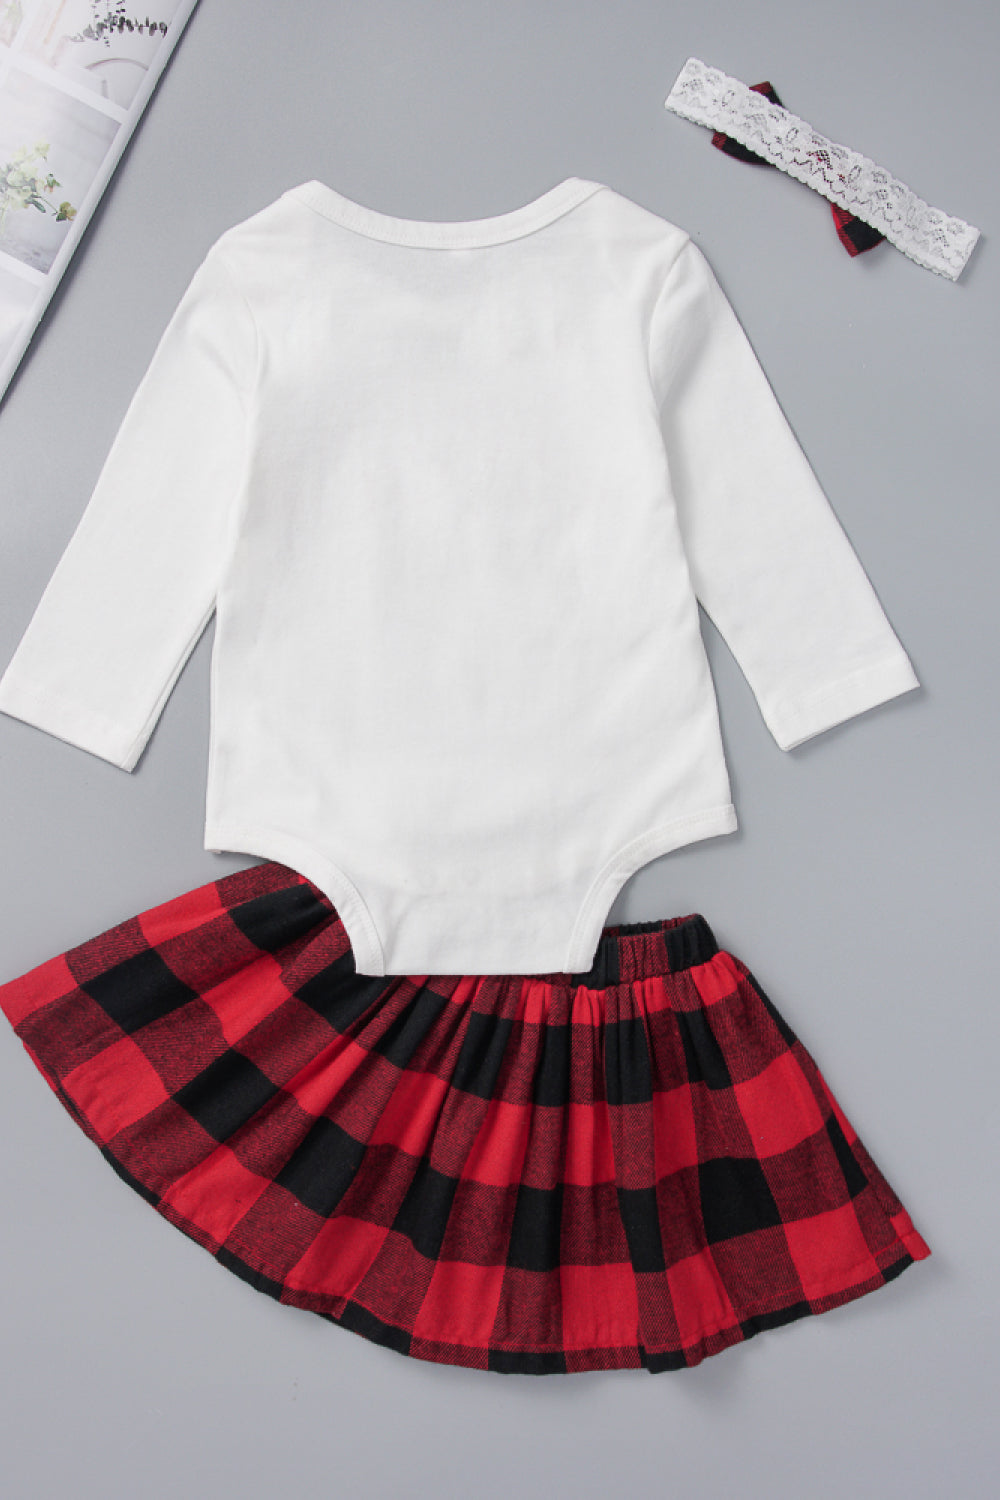 Baby Girls' Christmas Bodysuit and Plaid Skirt Set with Bow